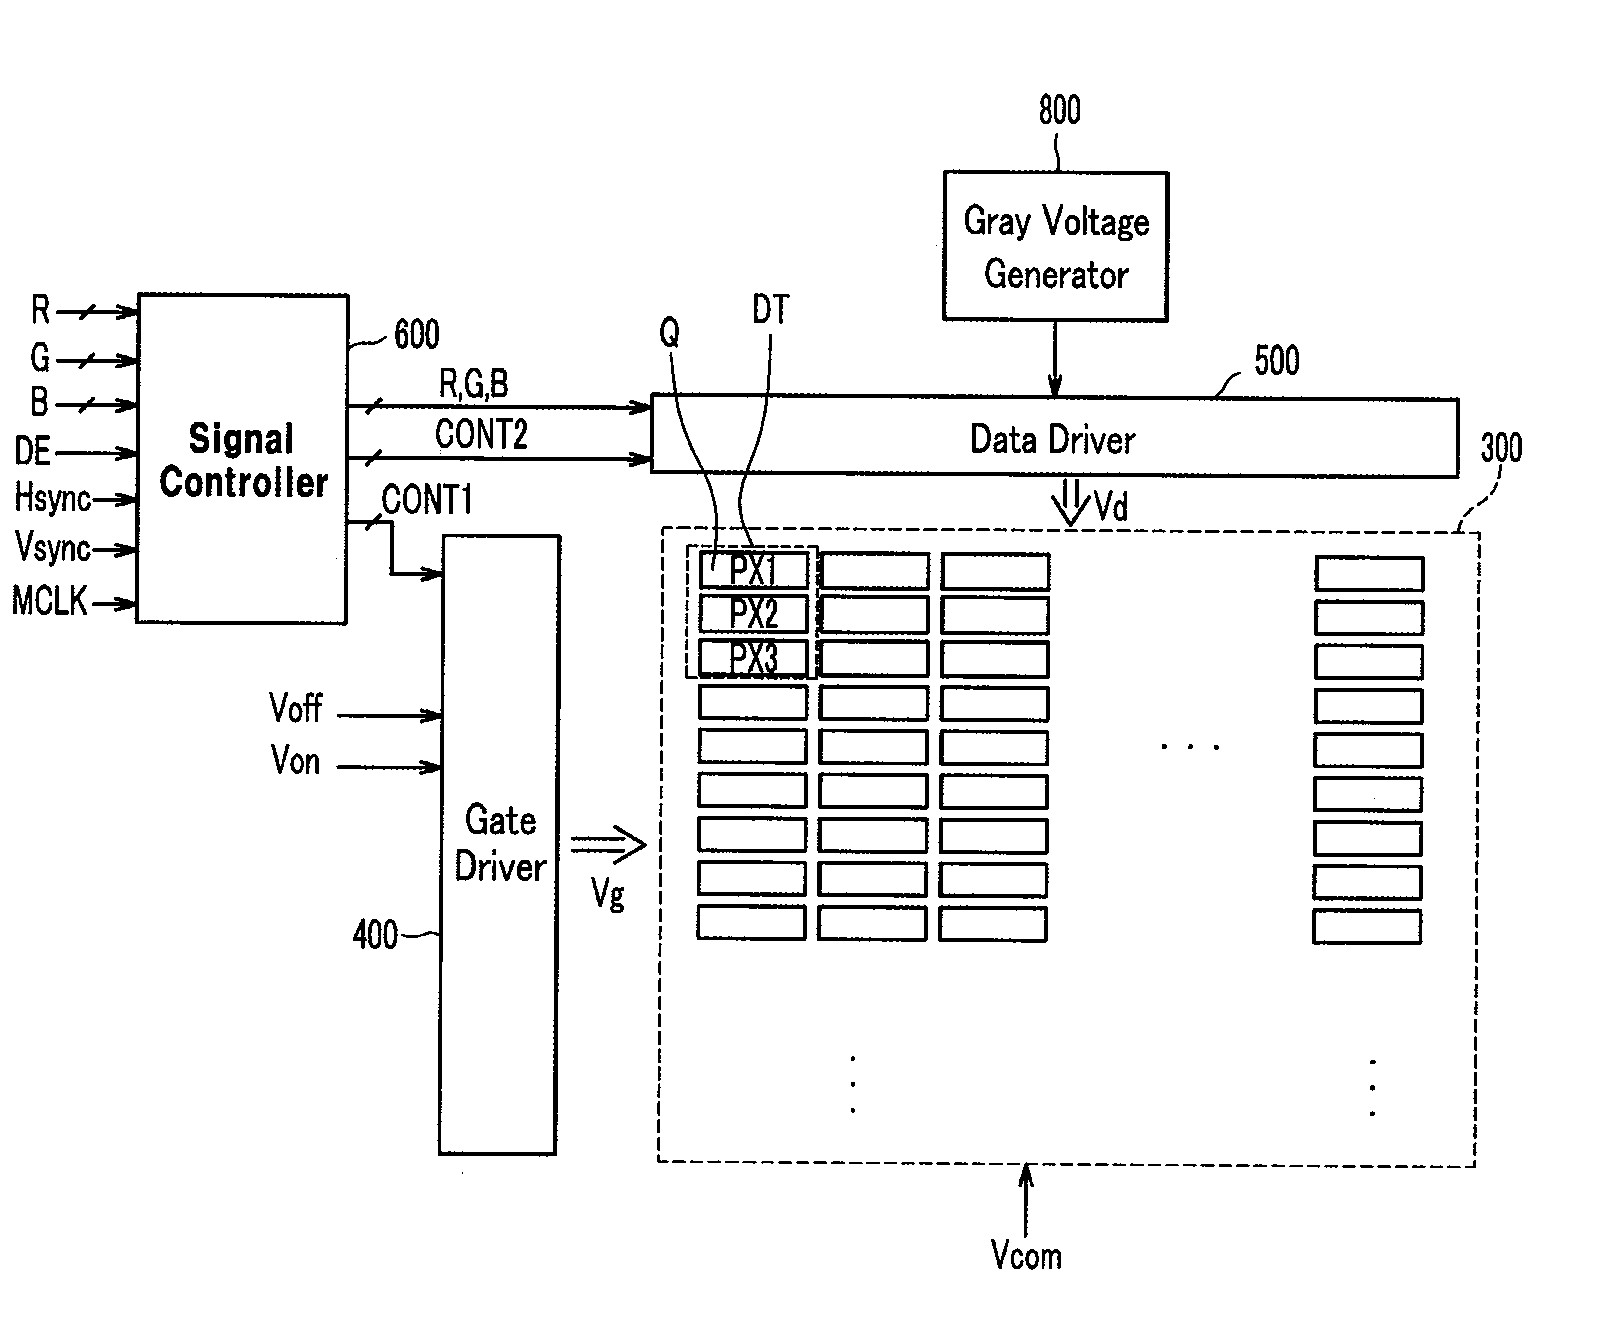 Liquid crystal display having line drivers with reduced need for wide bandwidth switching